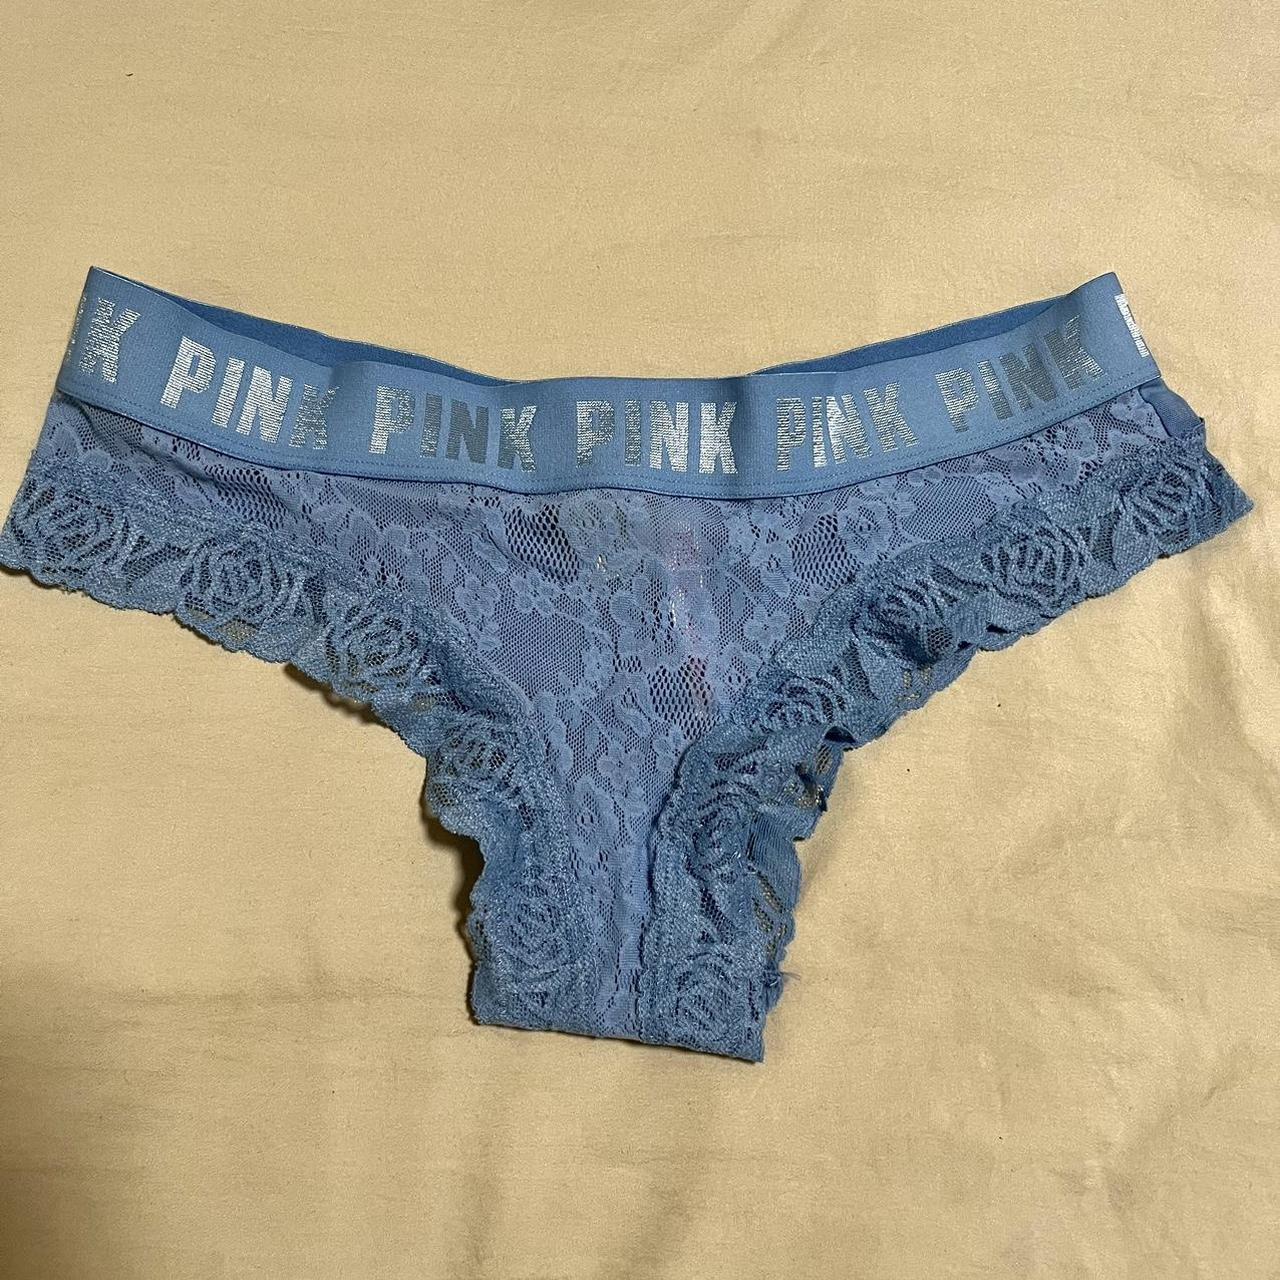 NWT vs pink lace underwear, #nwt #lace #vs